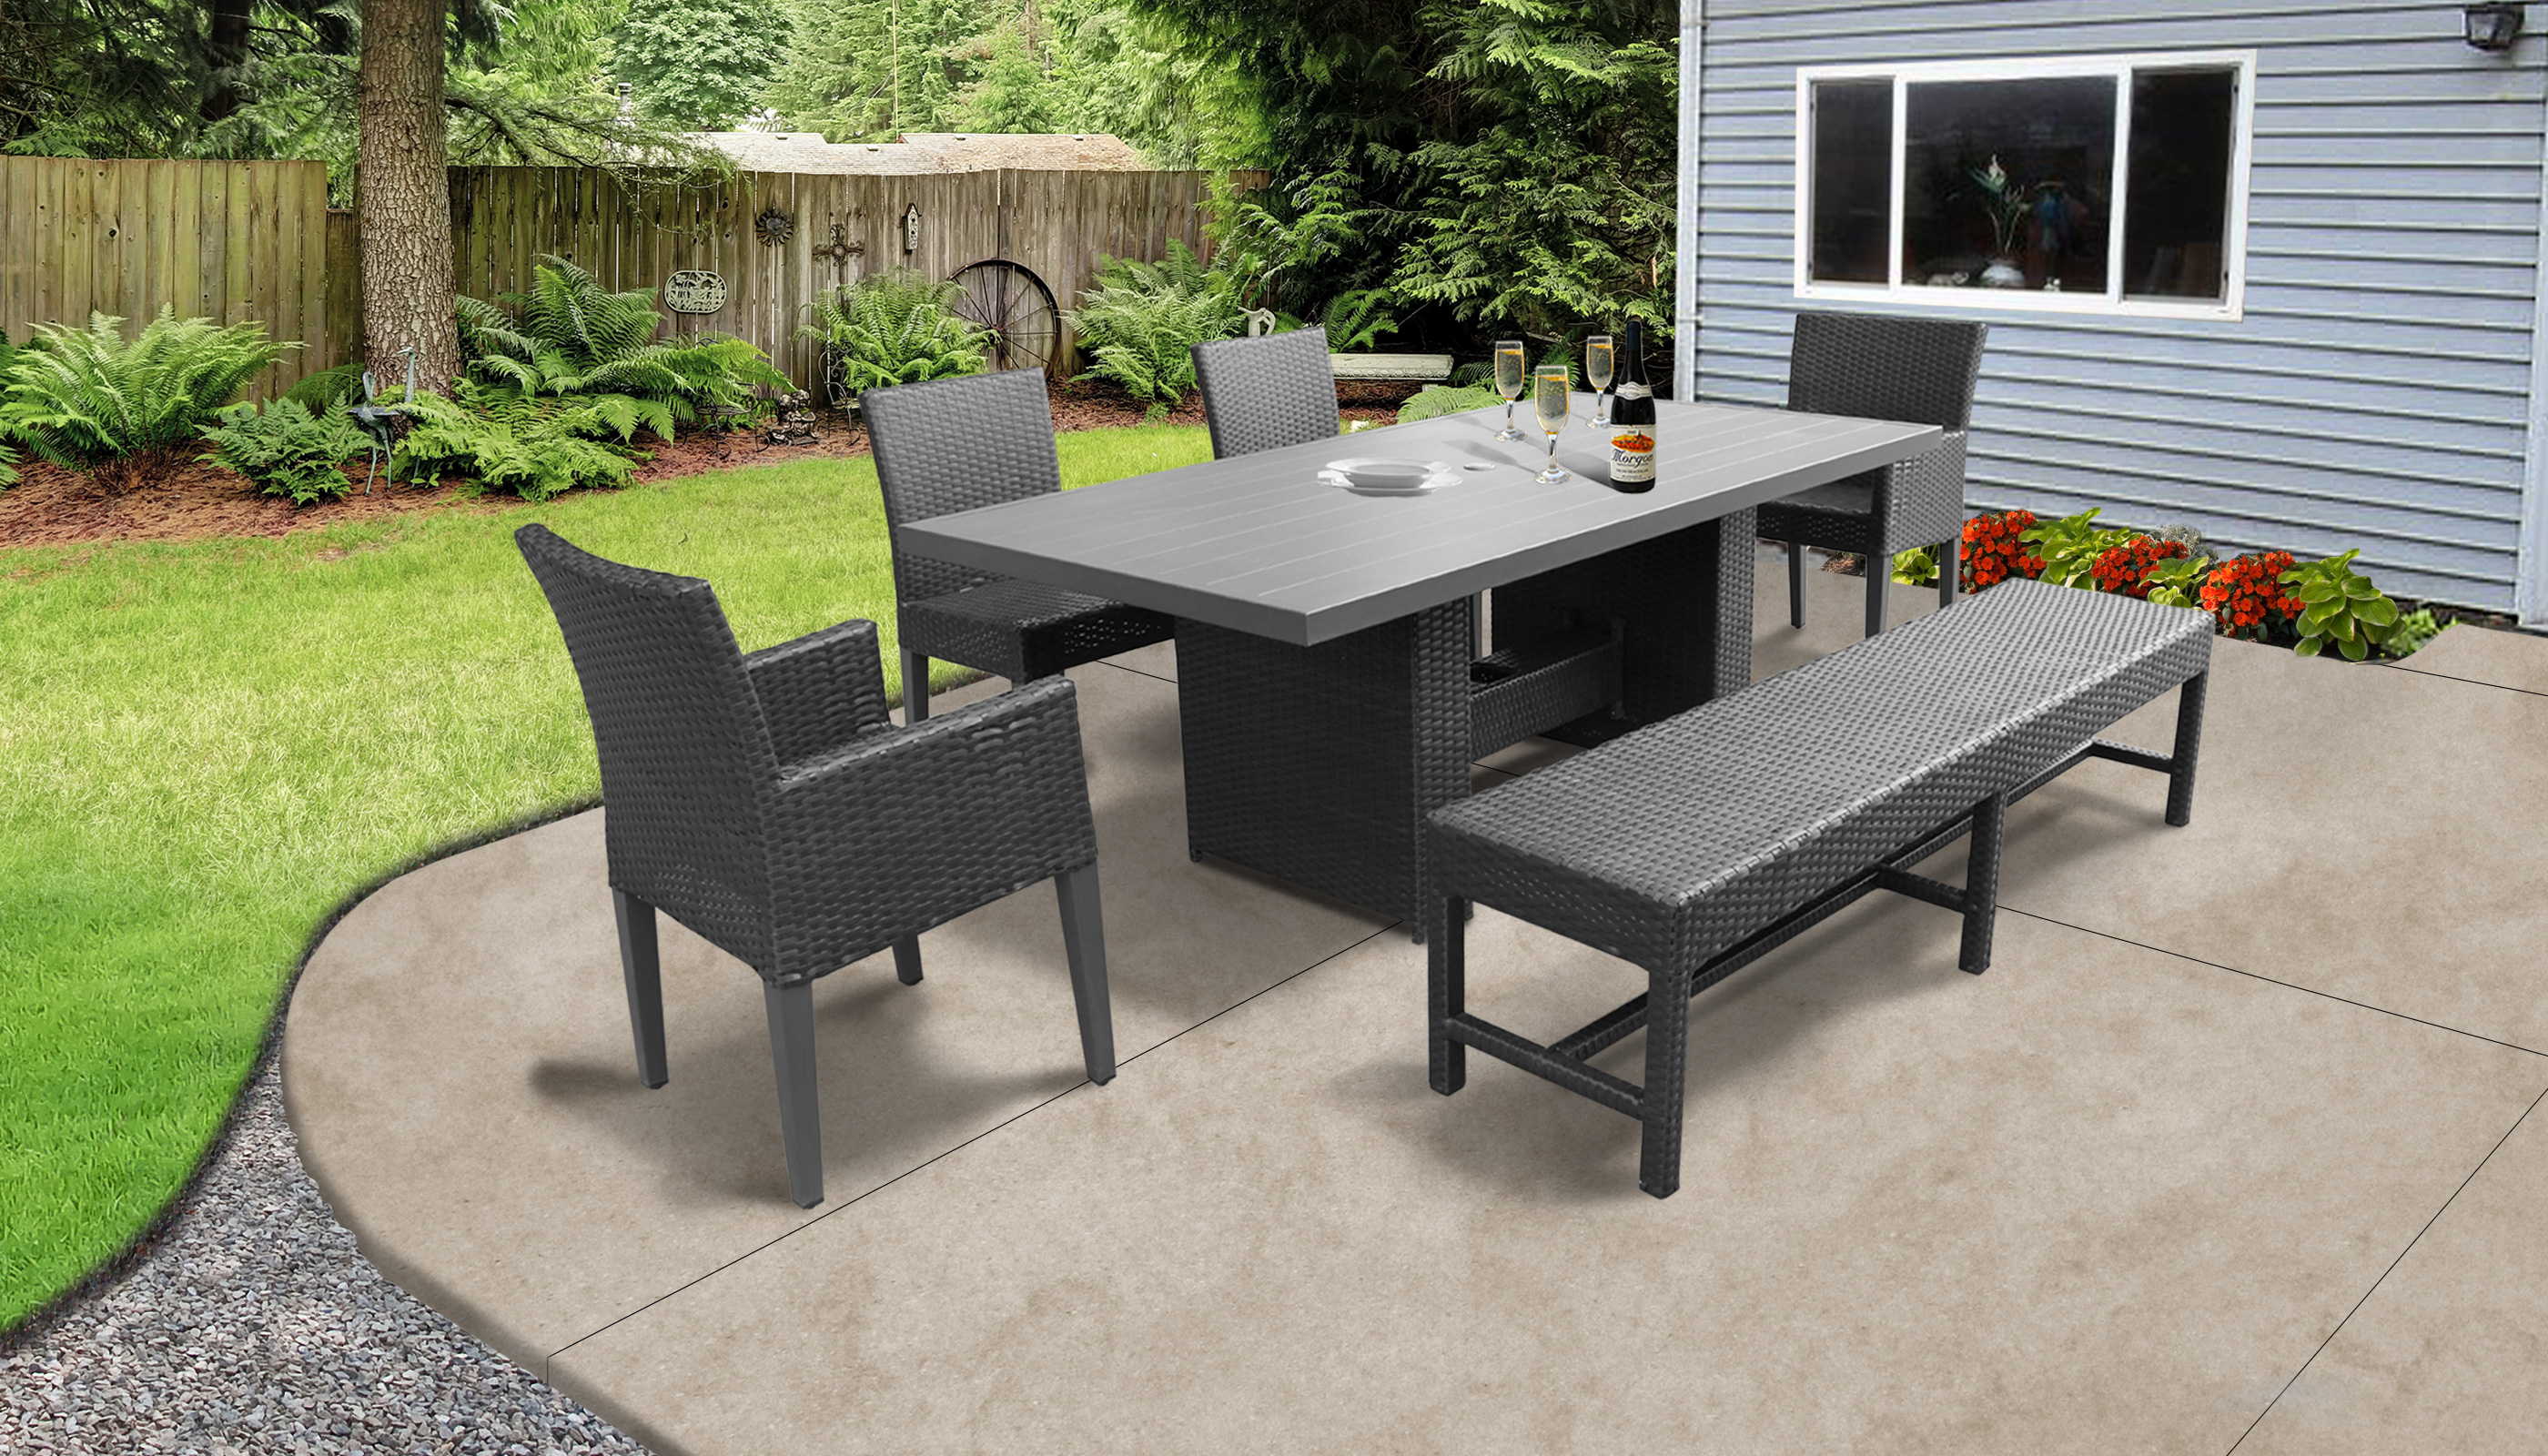 Belle Rectangular Outdoor Patio Dining Table with 2 ...